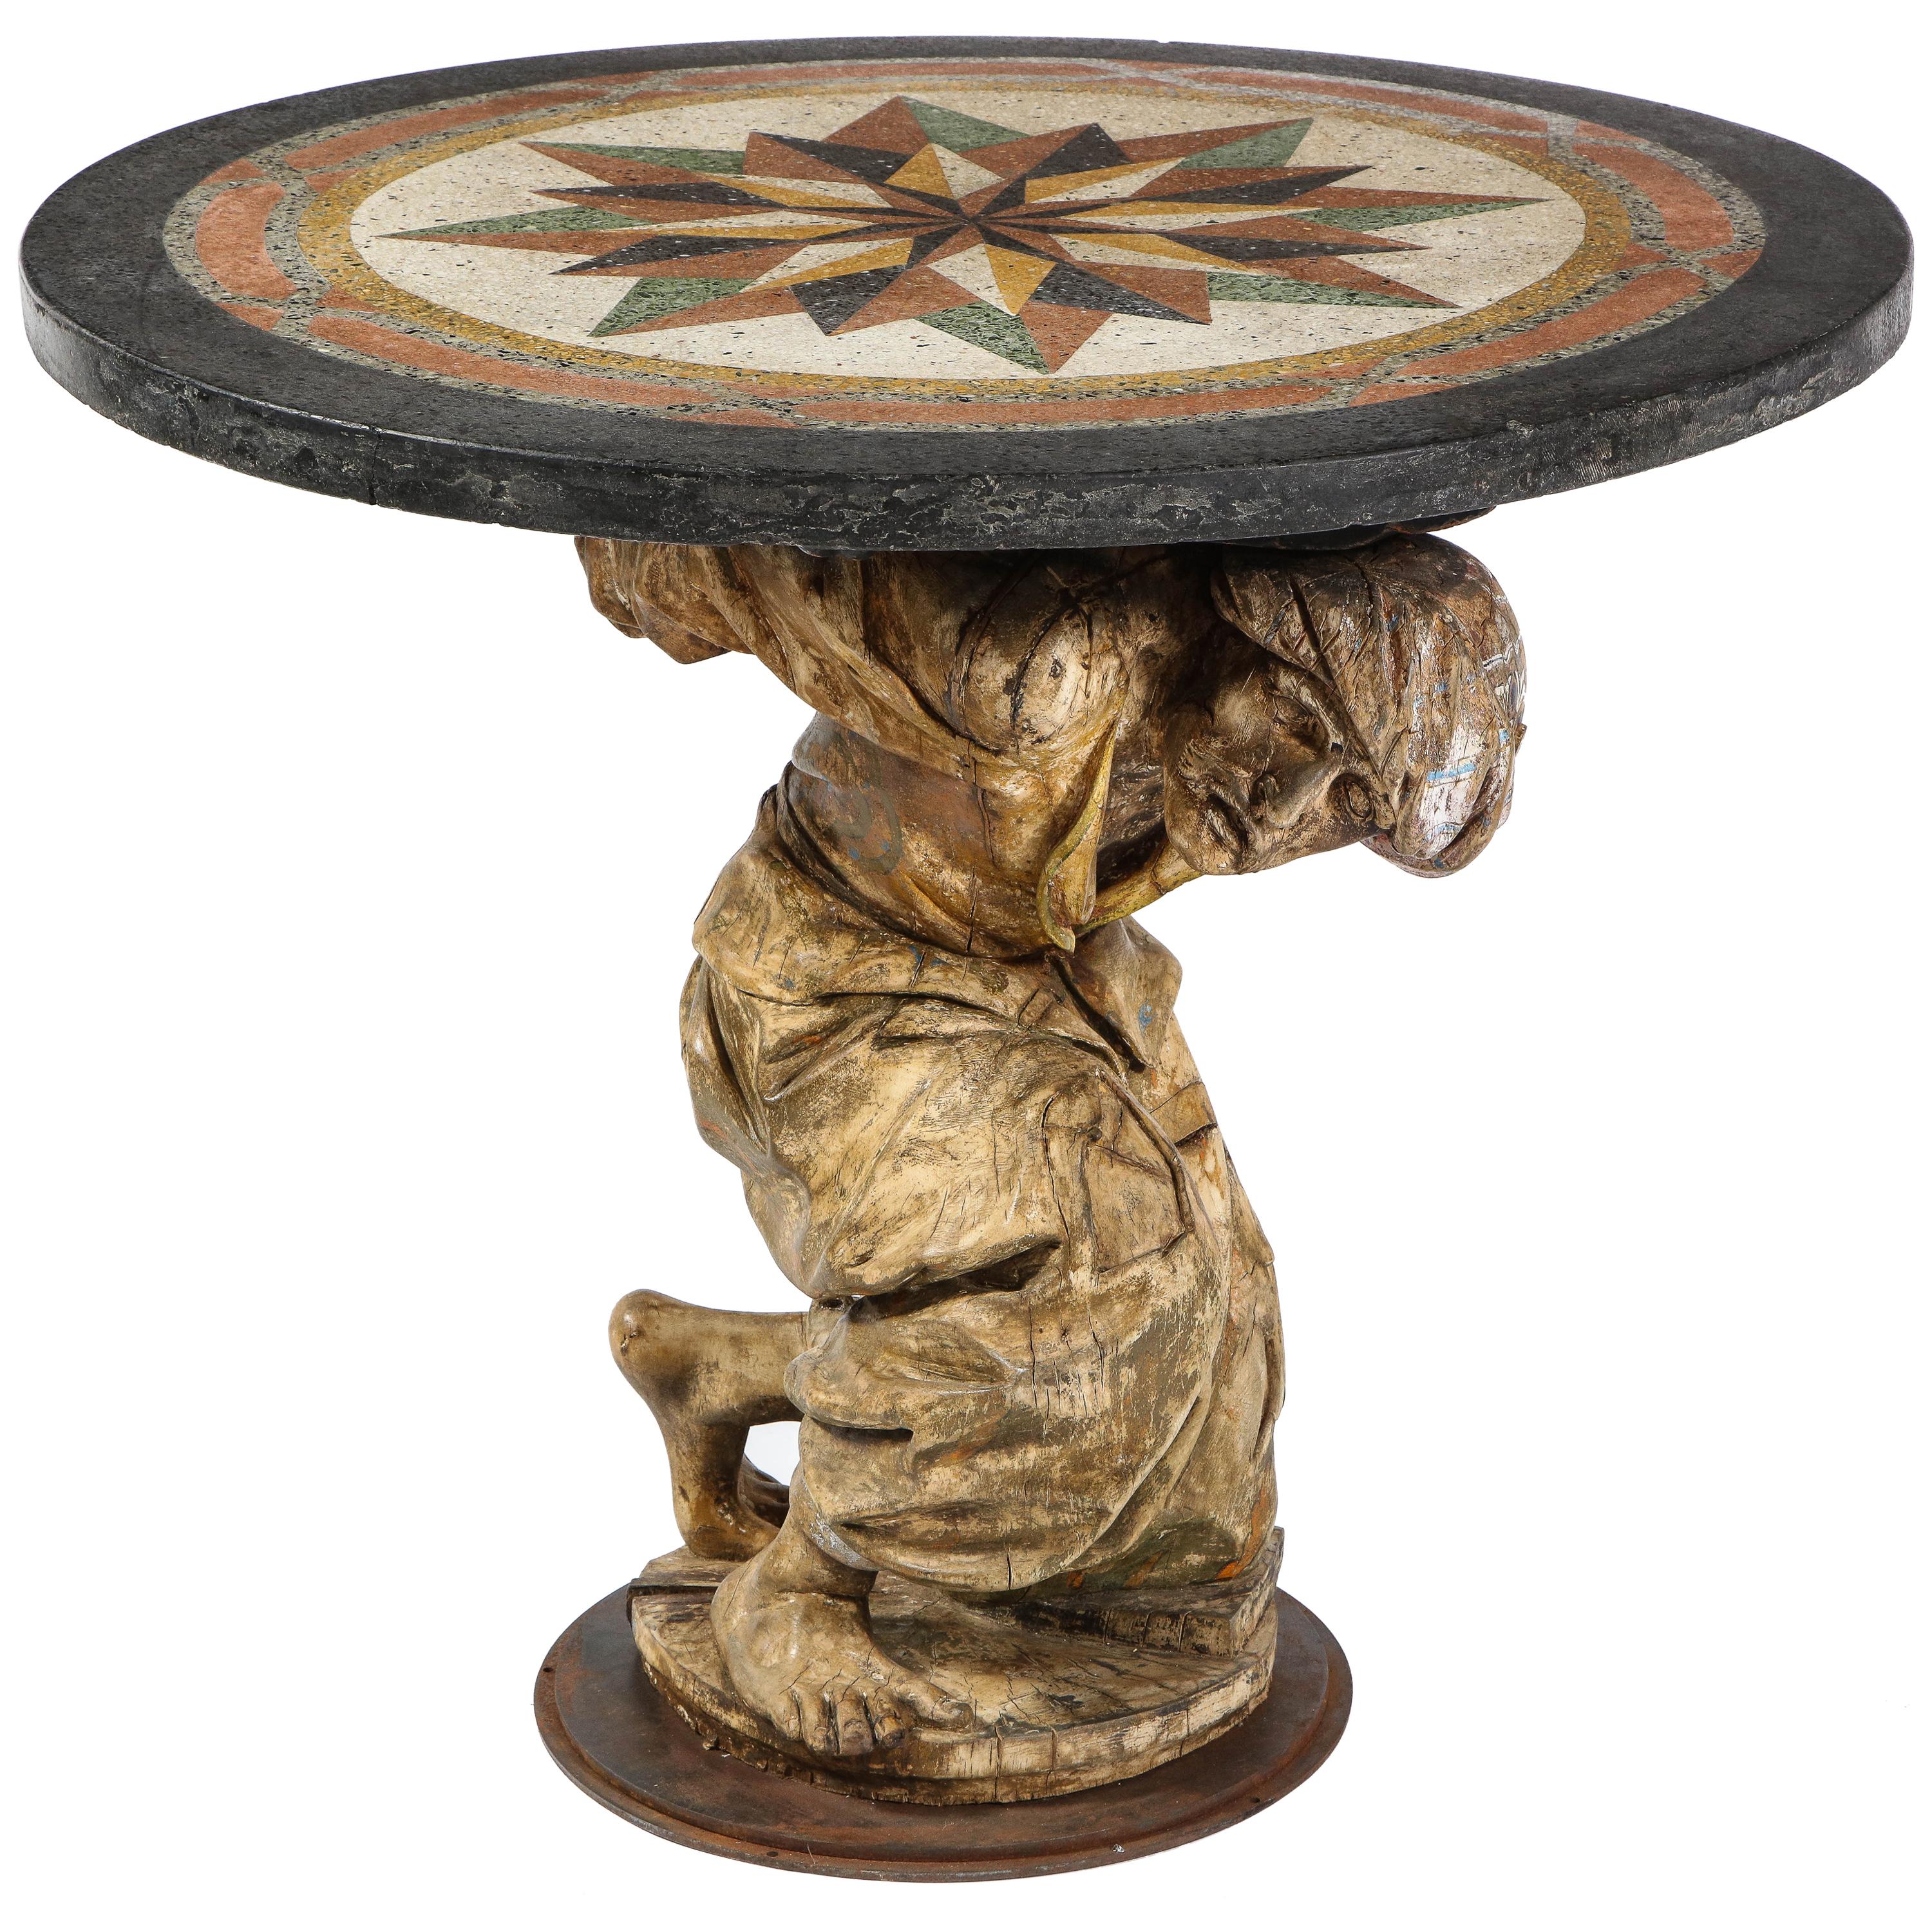 Center Table of a Carved Wooden Roman Figure of a Man with a Pietra Dura Top